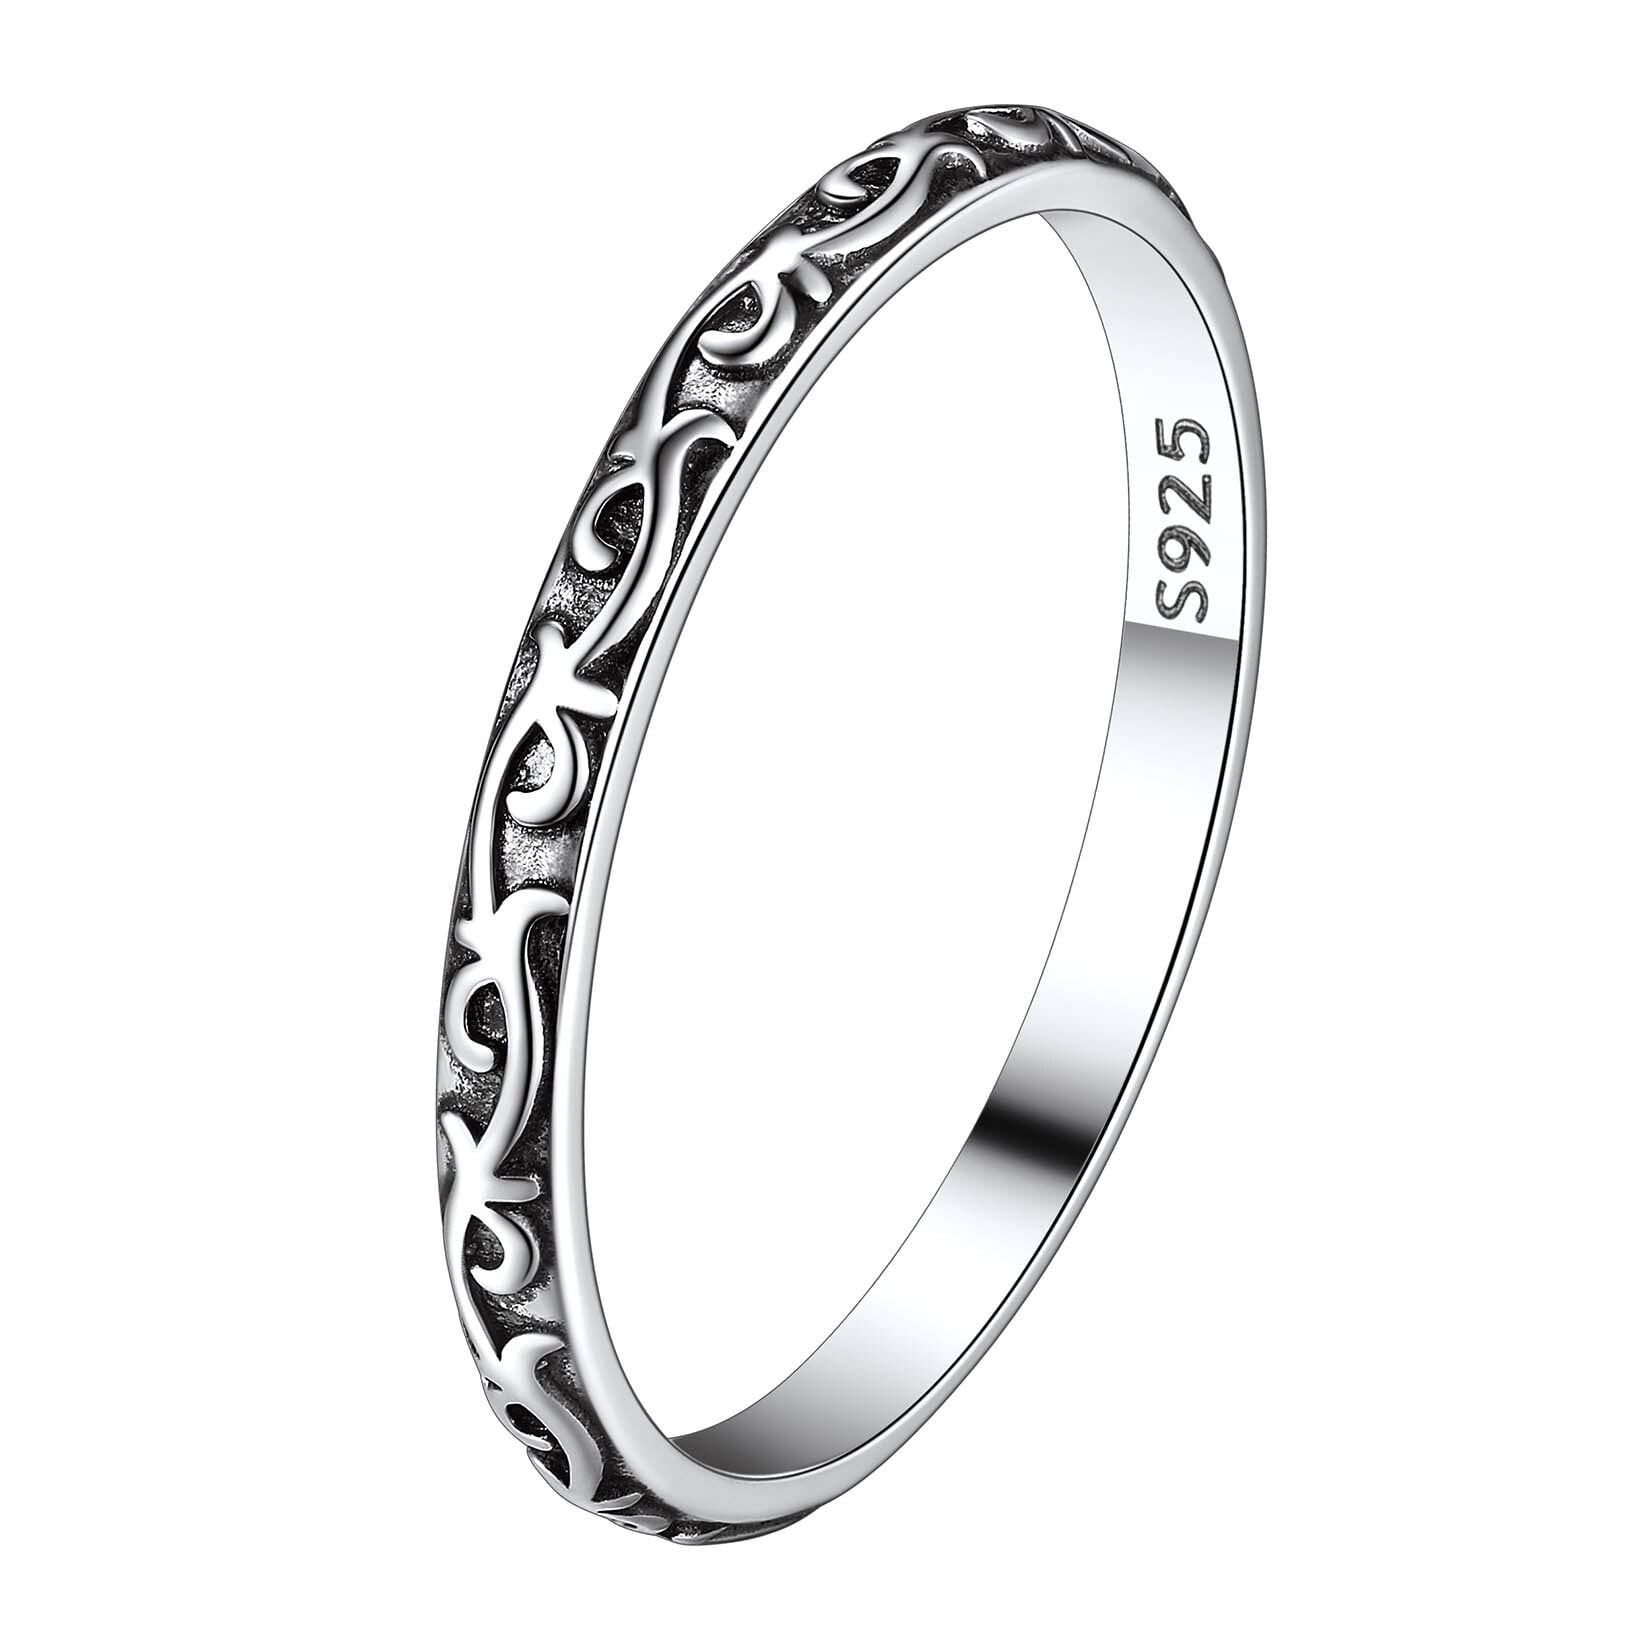 Genuine 925 Sterling Silver Half Chain Band Ring, Chain Ring